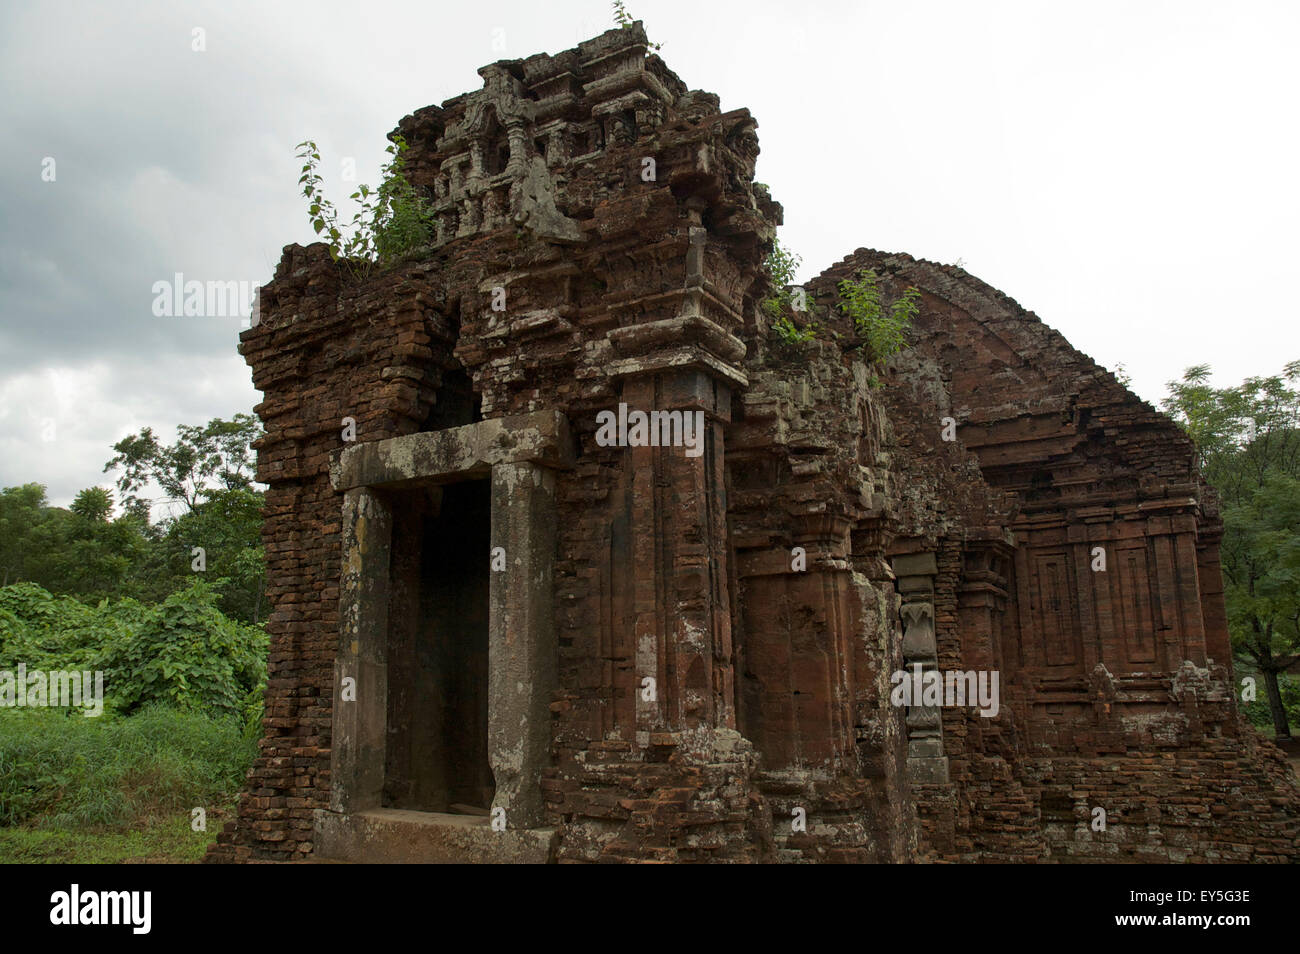 Ruins of the My Son Hindu temple complex, Quang Nam Province, Vietnam Stock Photo